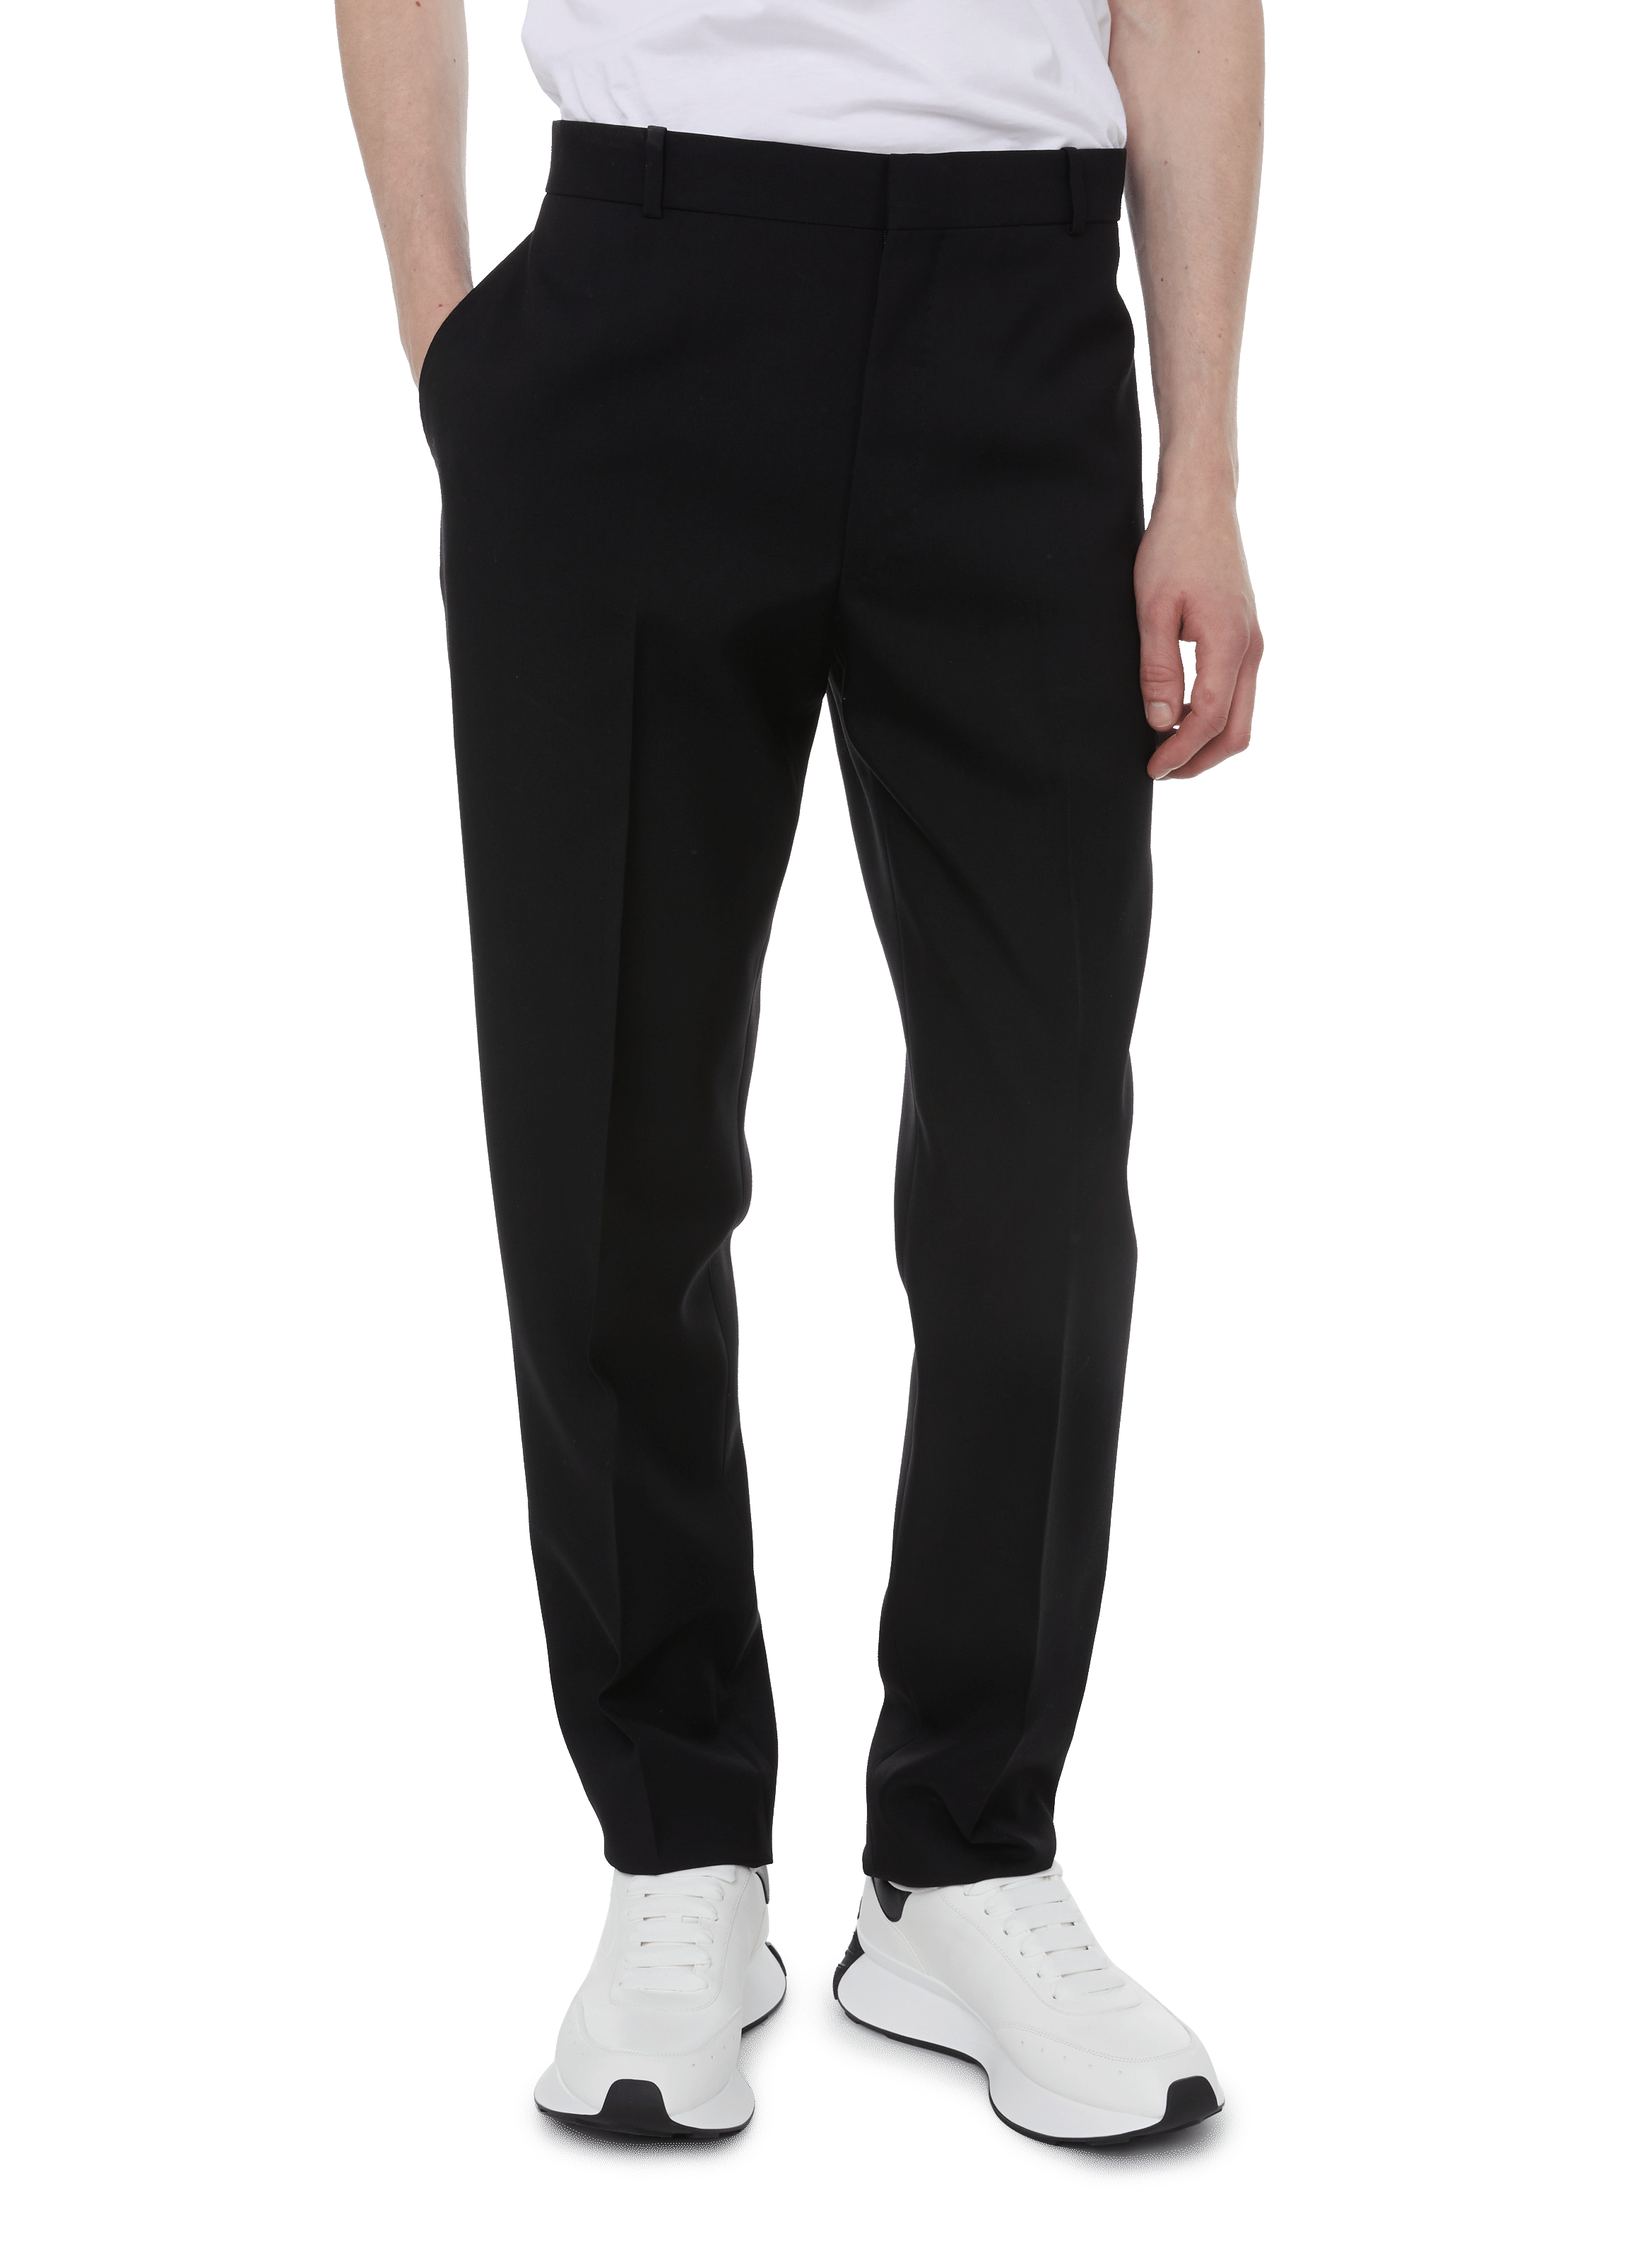 Alexander McQueen Trousers Sustainable Sartorial Wool -  761286QJACX7050BRIGHTYELLOW | Solesense